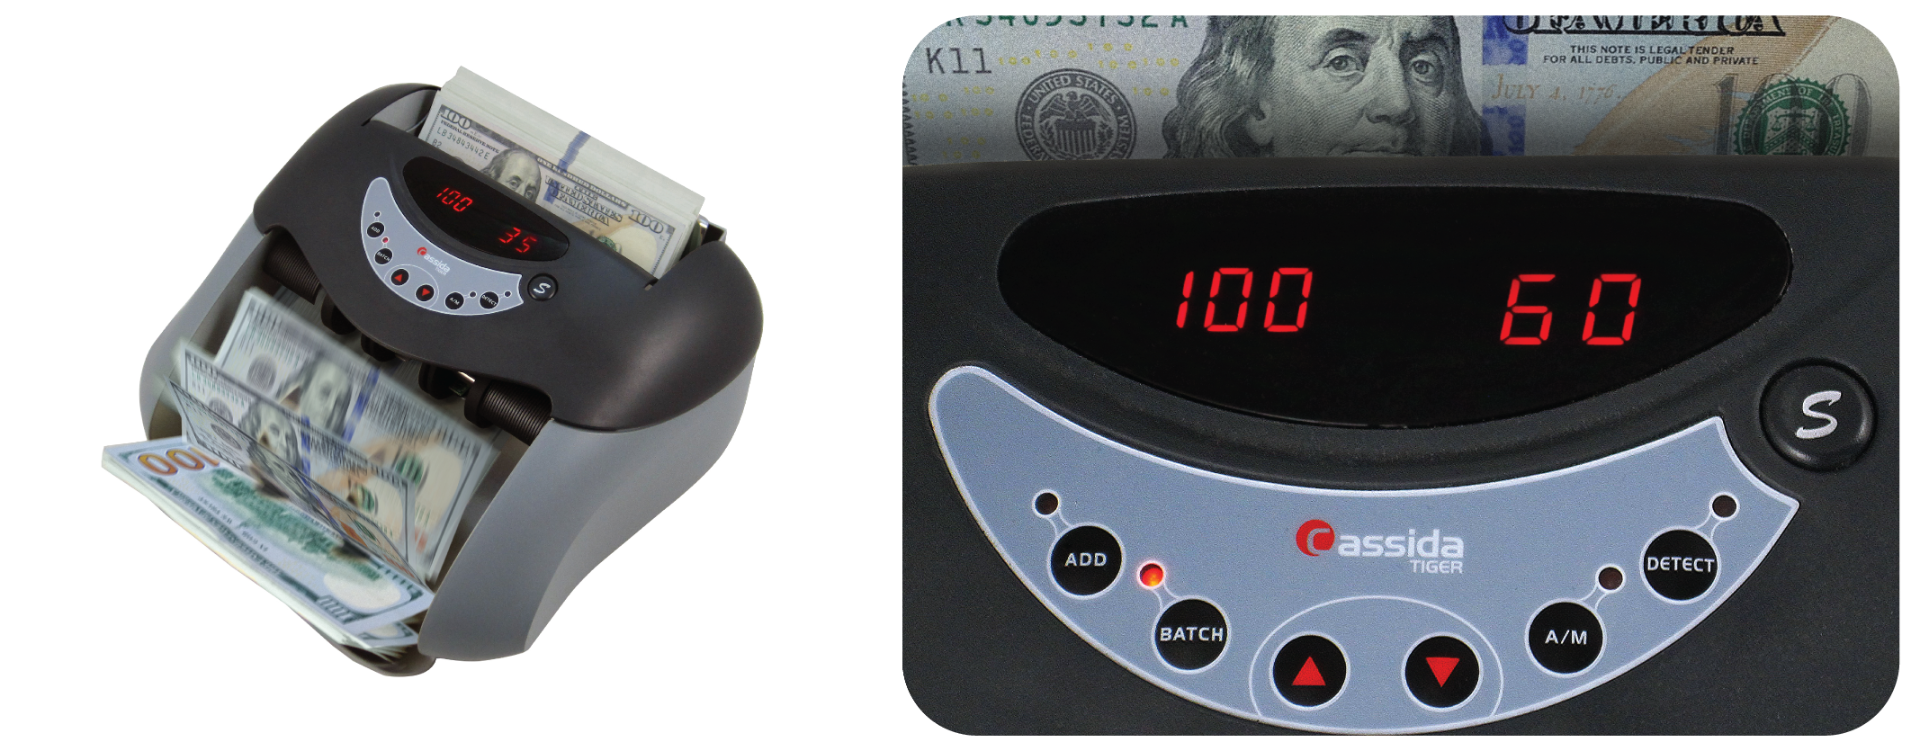 6600 bill counter save time and money